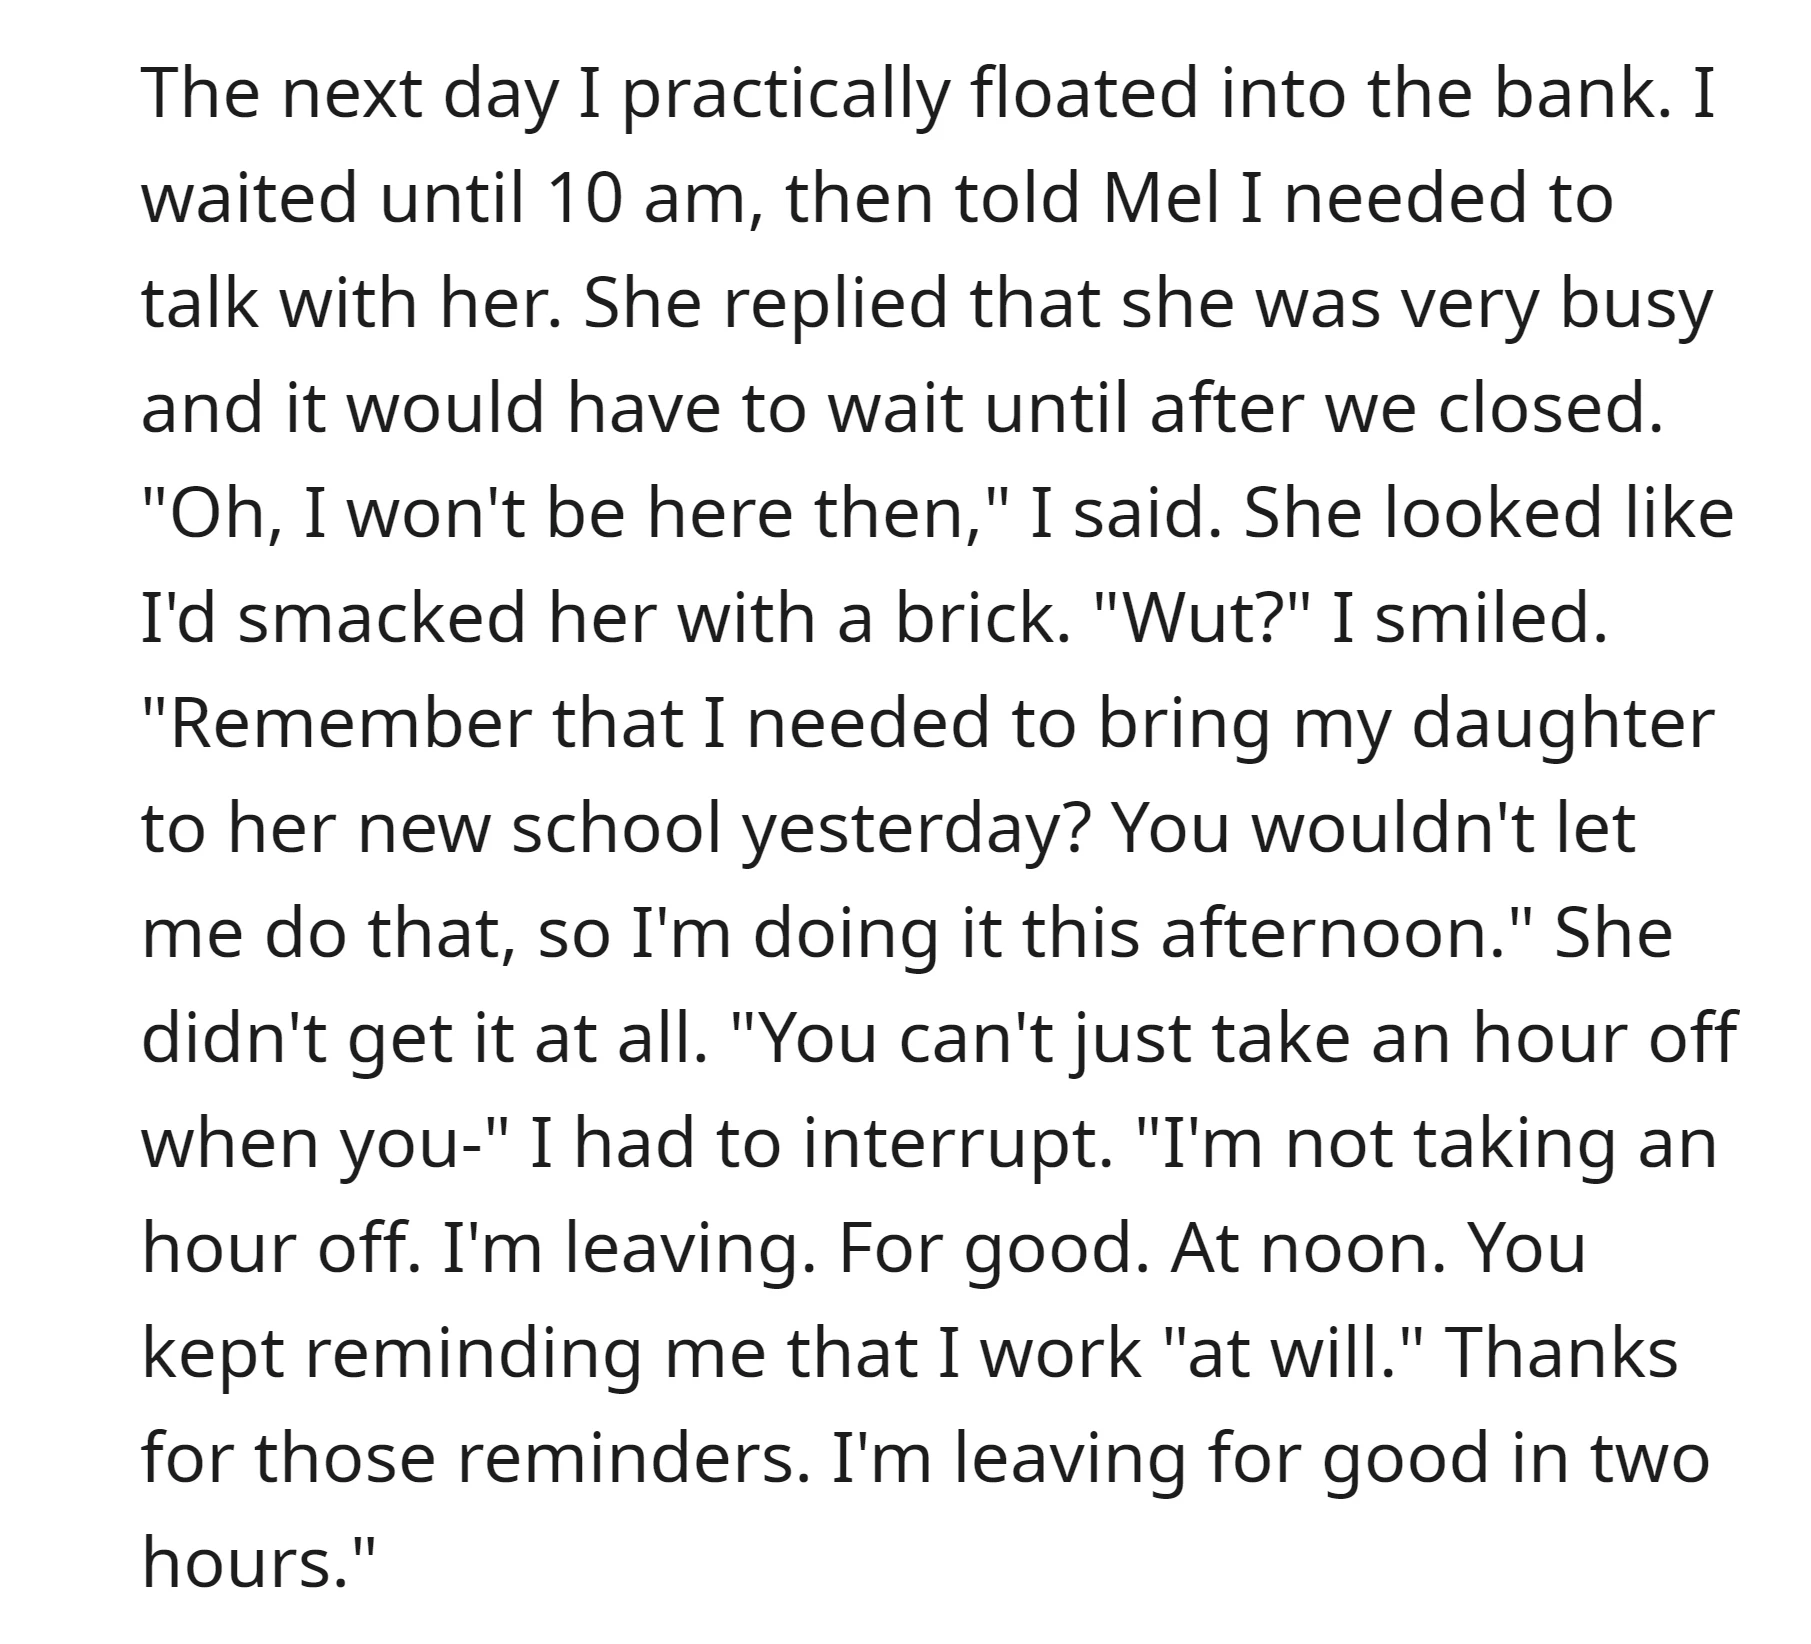 The OP surprised her supervisor by announcing she was quitting on short notice